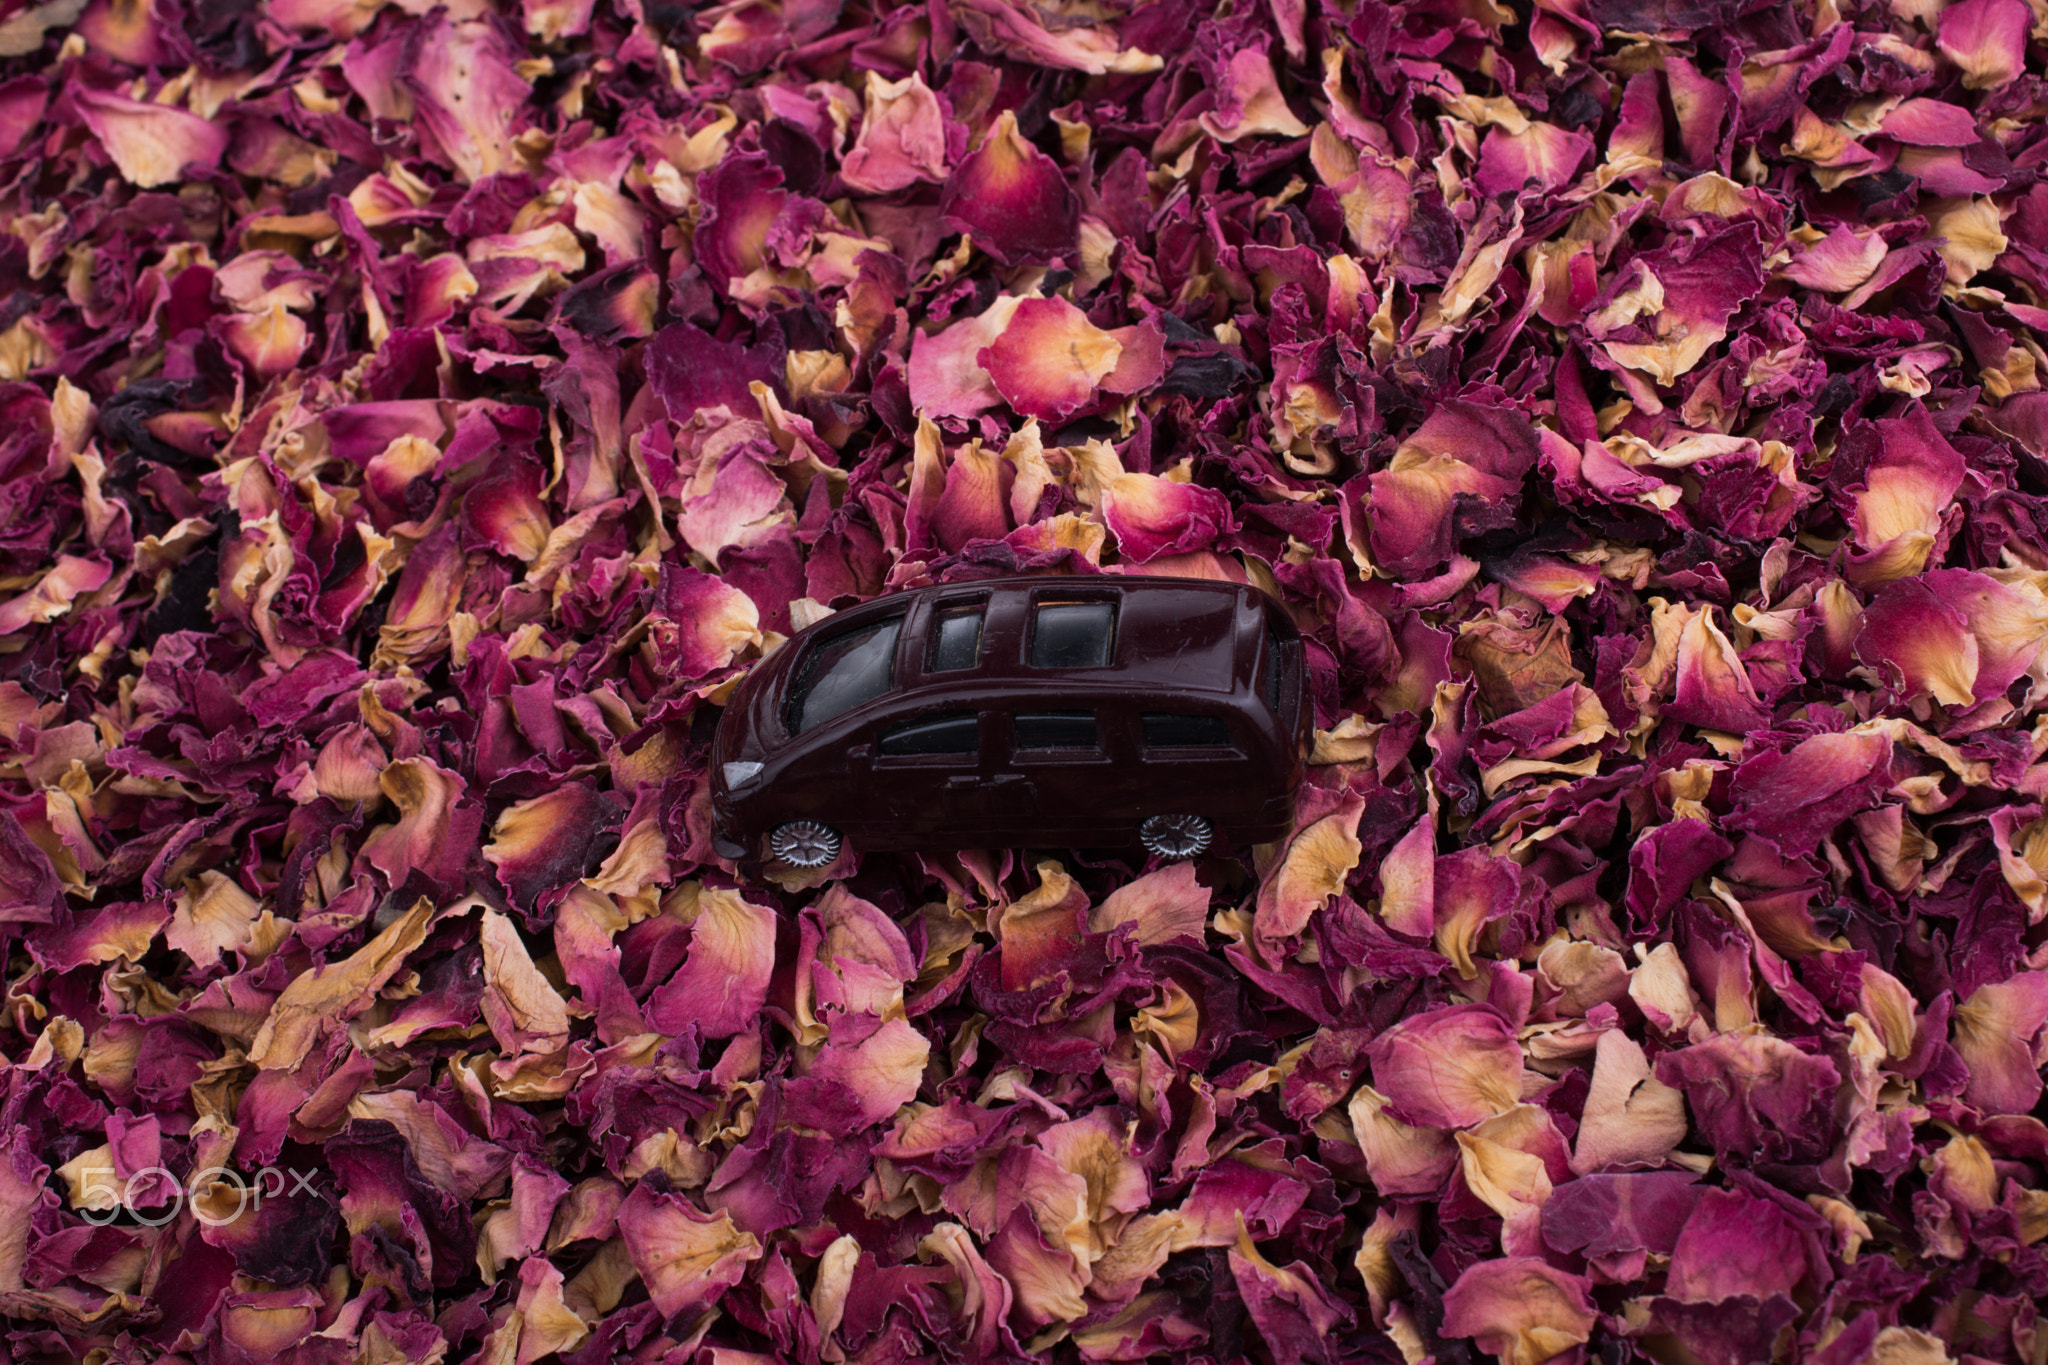 Toy car on a background of dried rose petals